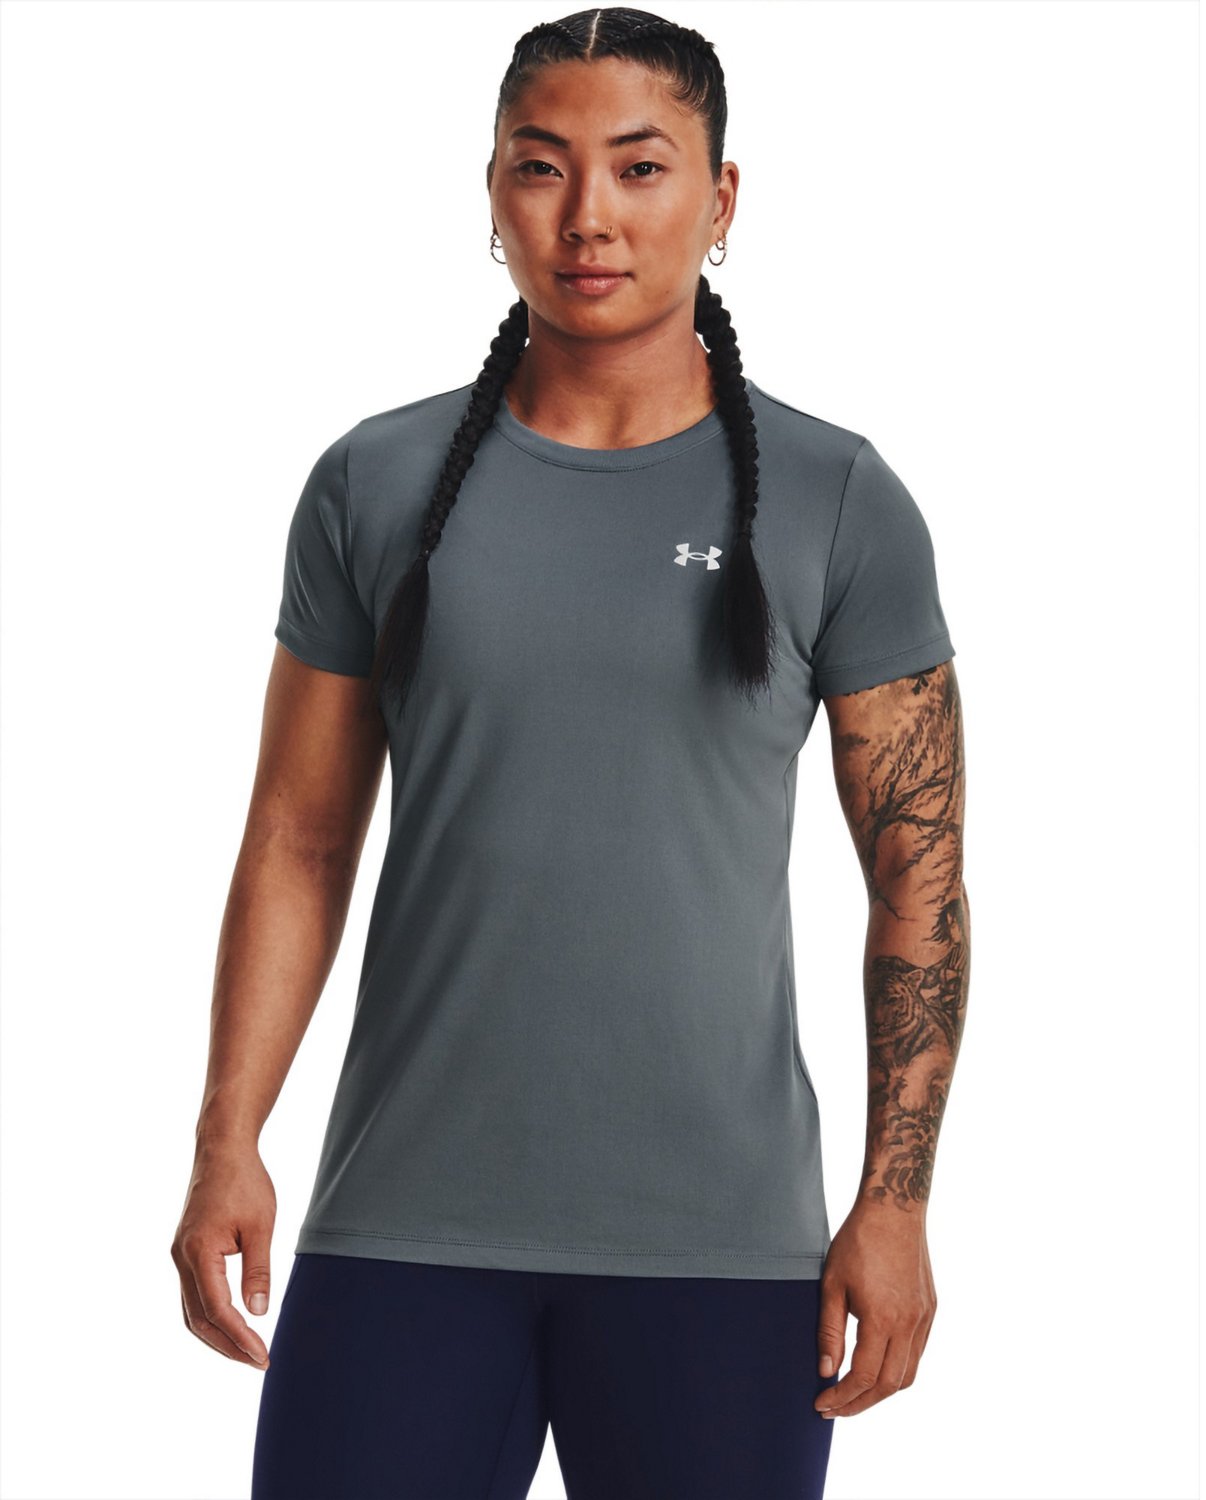 Under Armour Spring T-shirts for Women